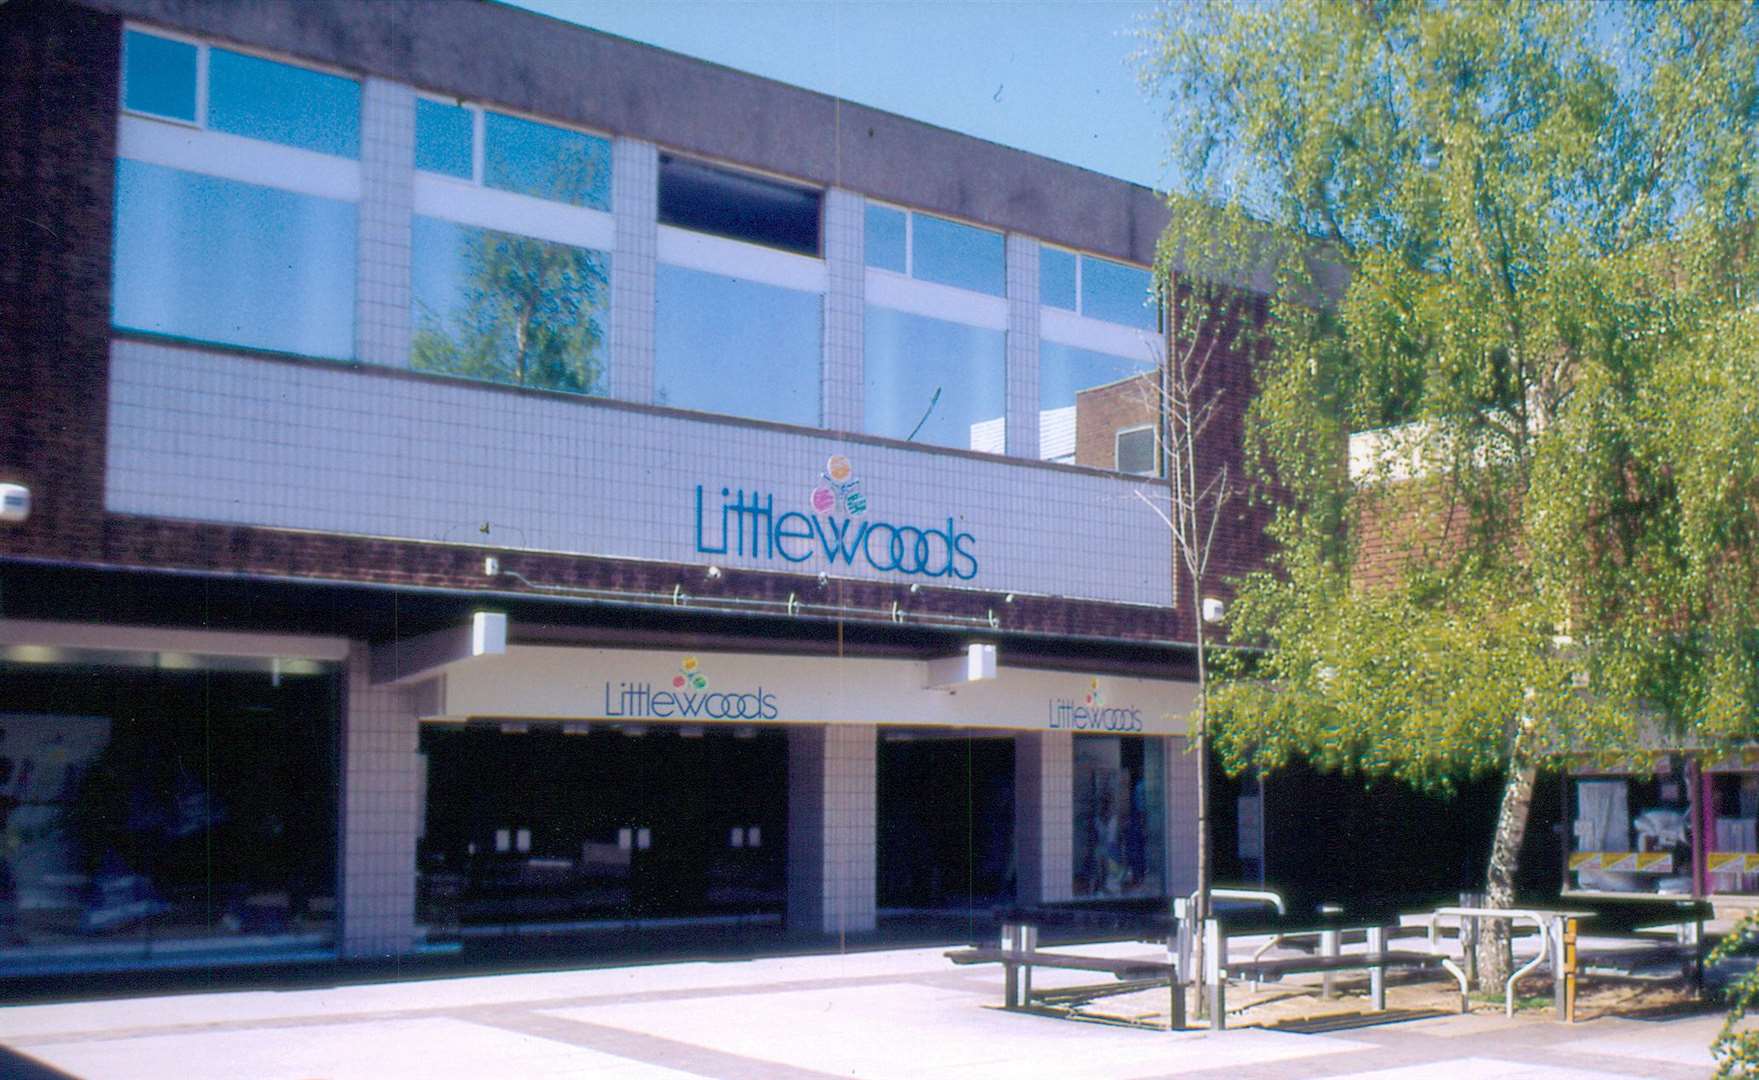 The Tufton Centre in 1988, showing the Littlewoods store which replaced Tesco. Picture: Steve Salter